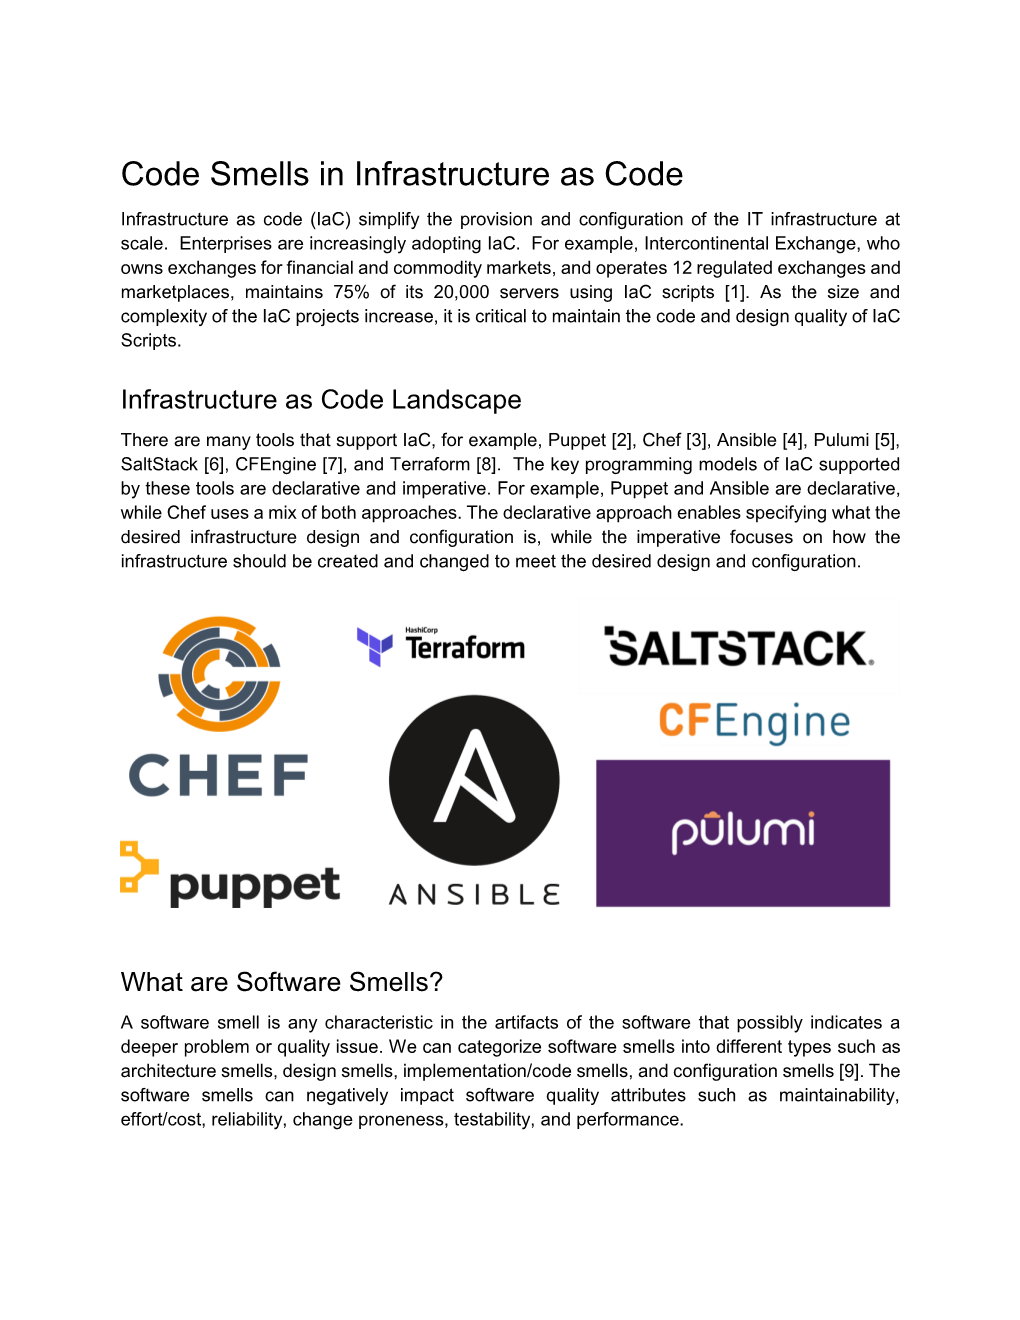 Code Smells in Infrastructure As Code